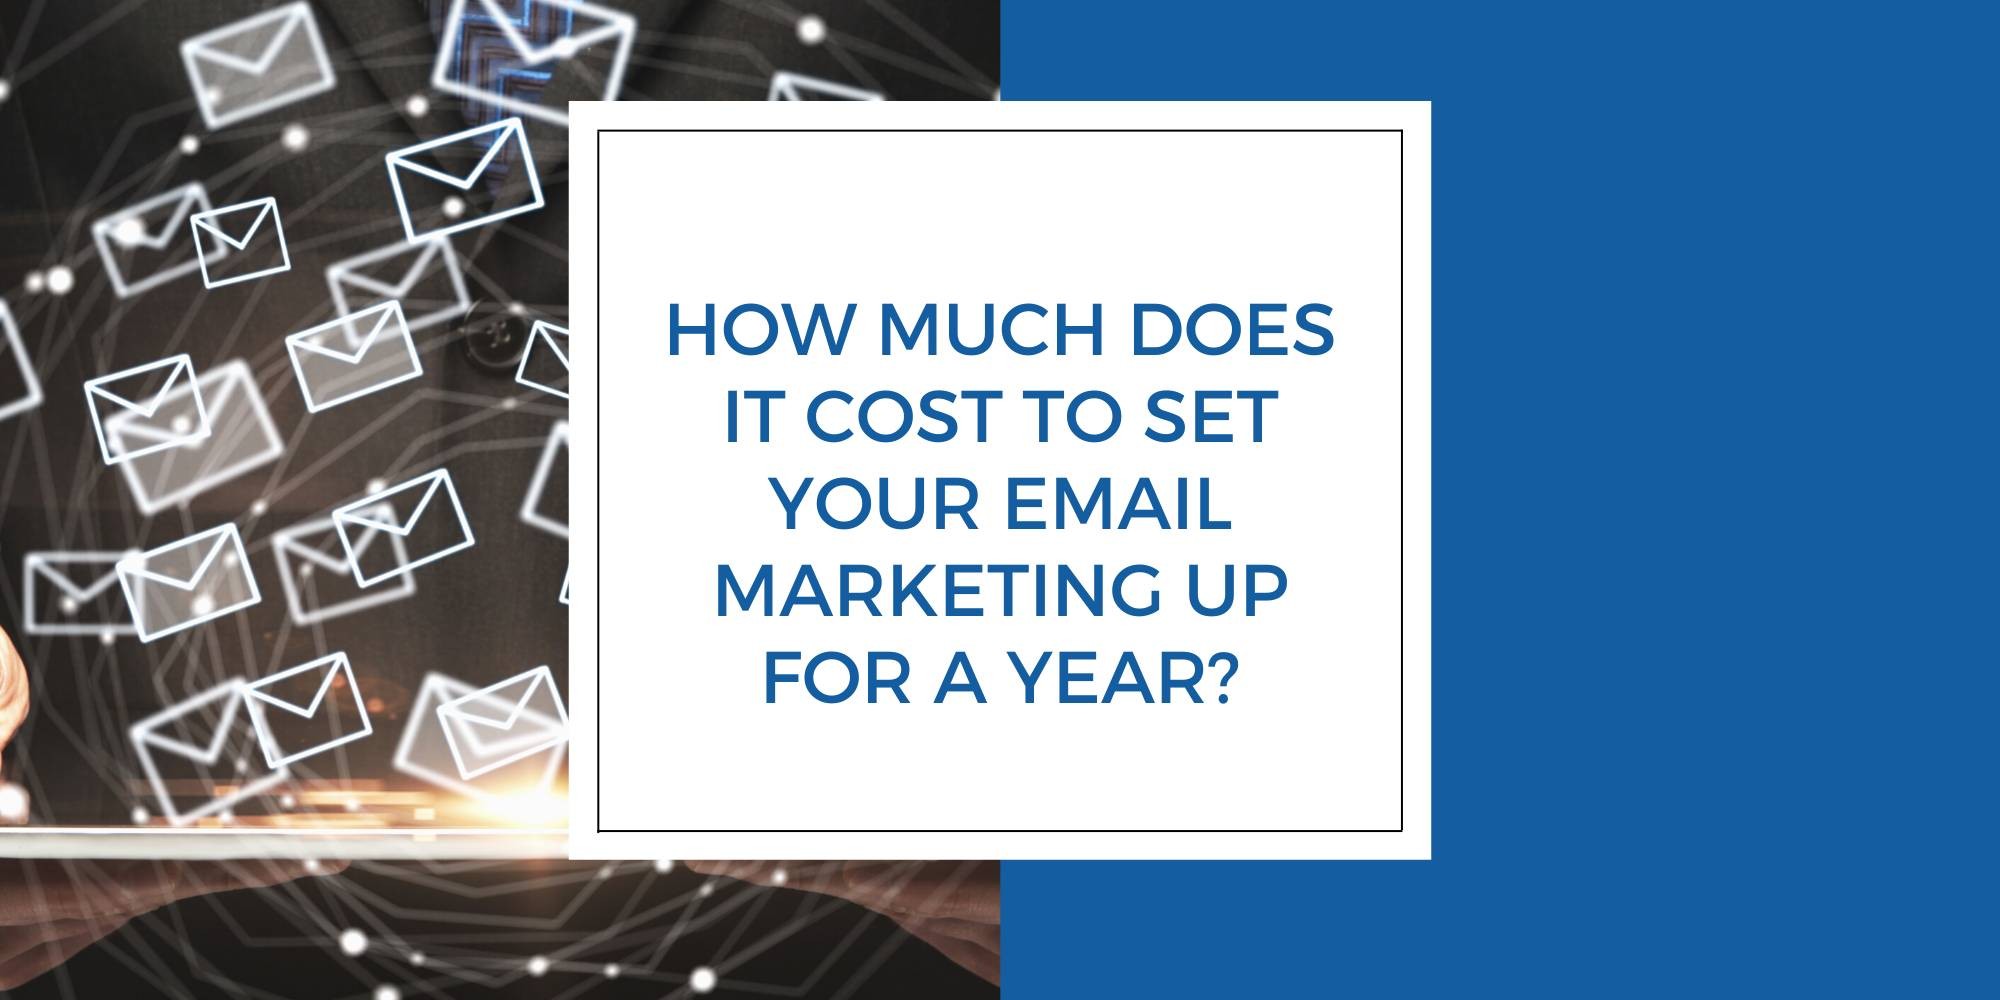 How much does it Cost to set your Email Marketing up for a year?